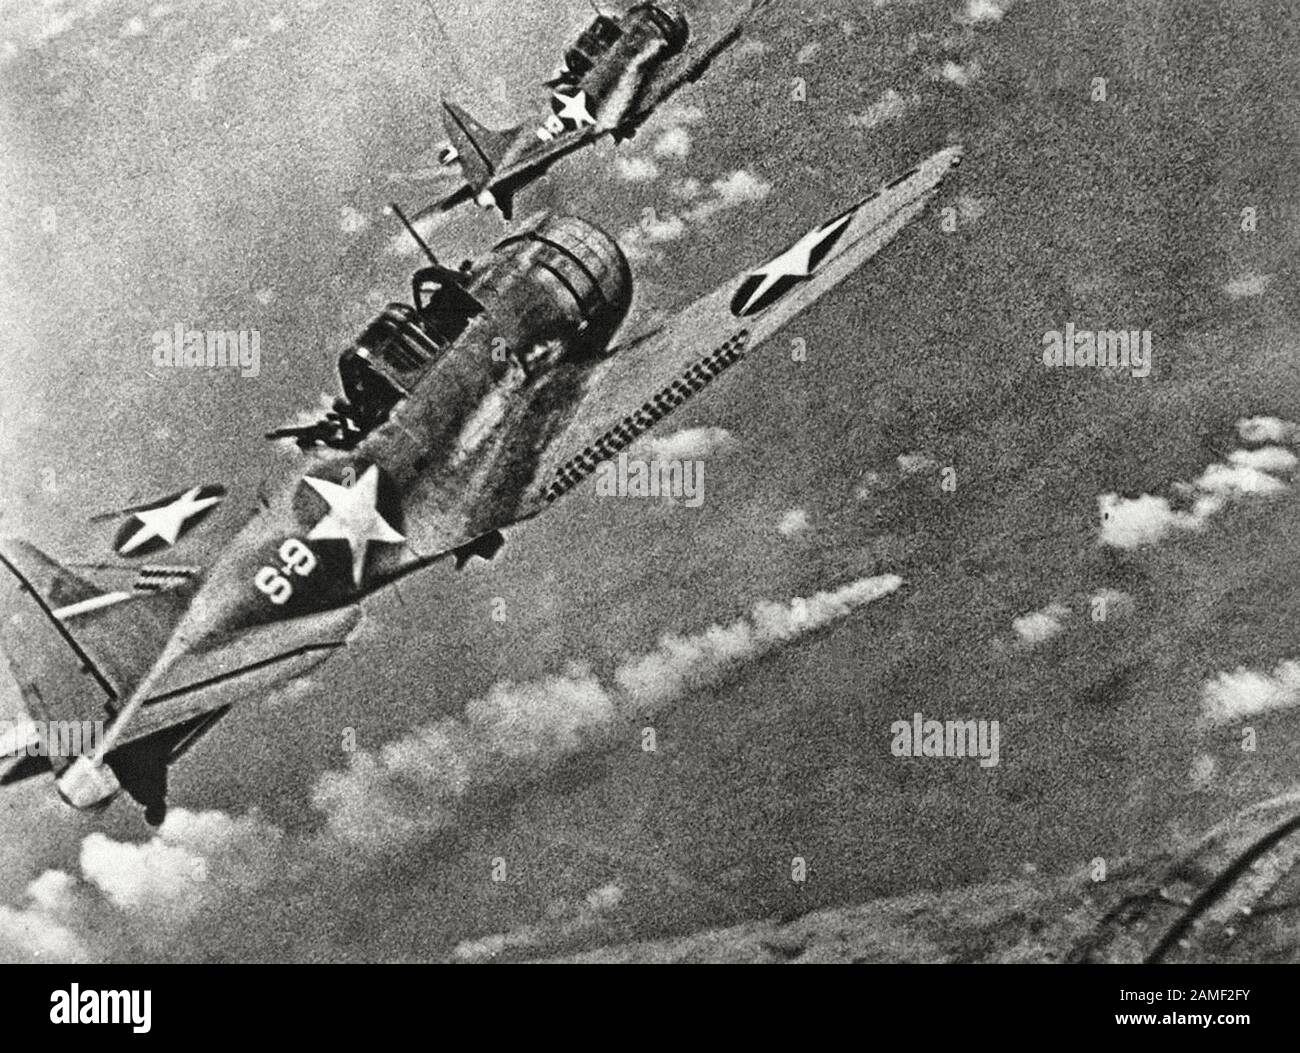 American fighters during the attack on the Japanese fleet off Midway, in June of 1942. At center a burning Japanese ship is visible. The Japanese airc Stock Photo